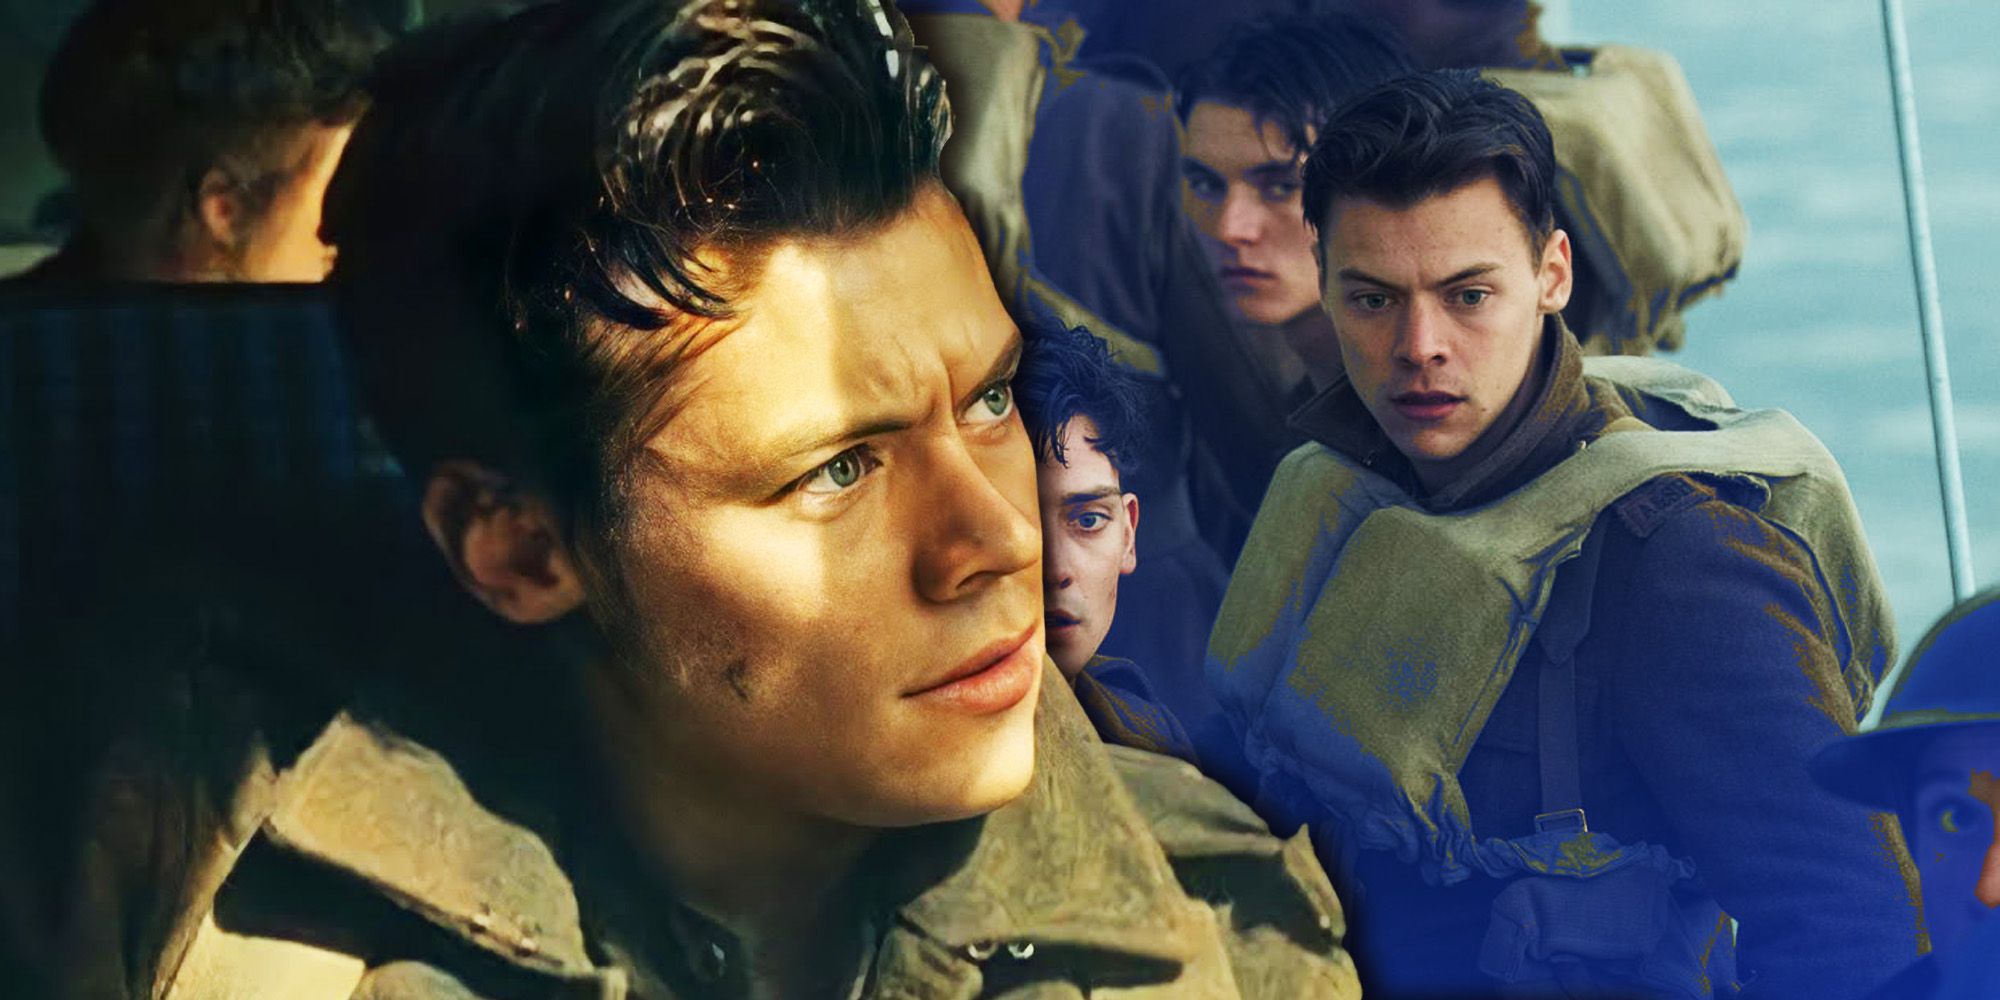 Harry Styles as one of the soldiers in Dunkirk